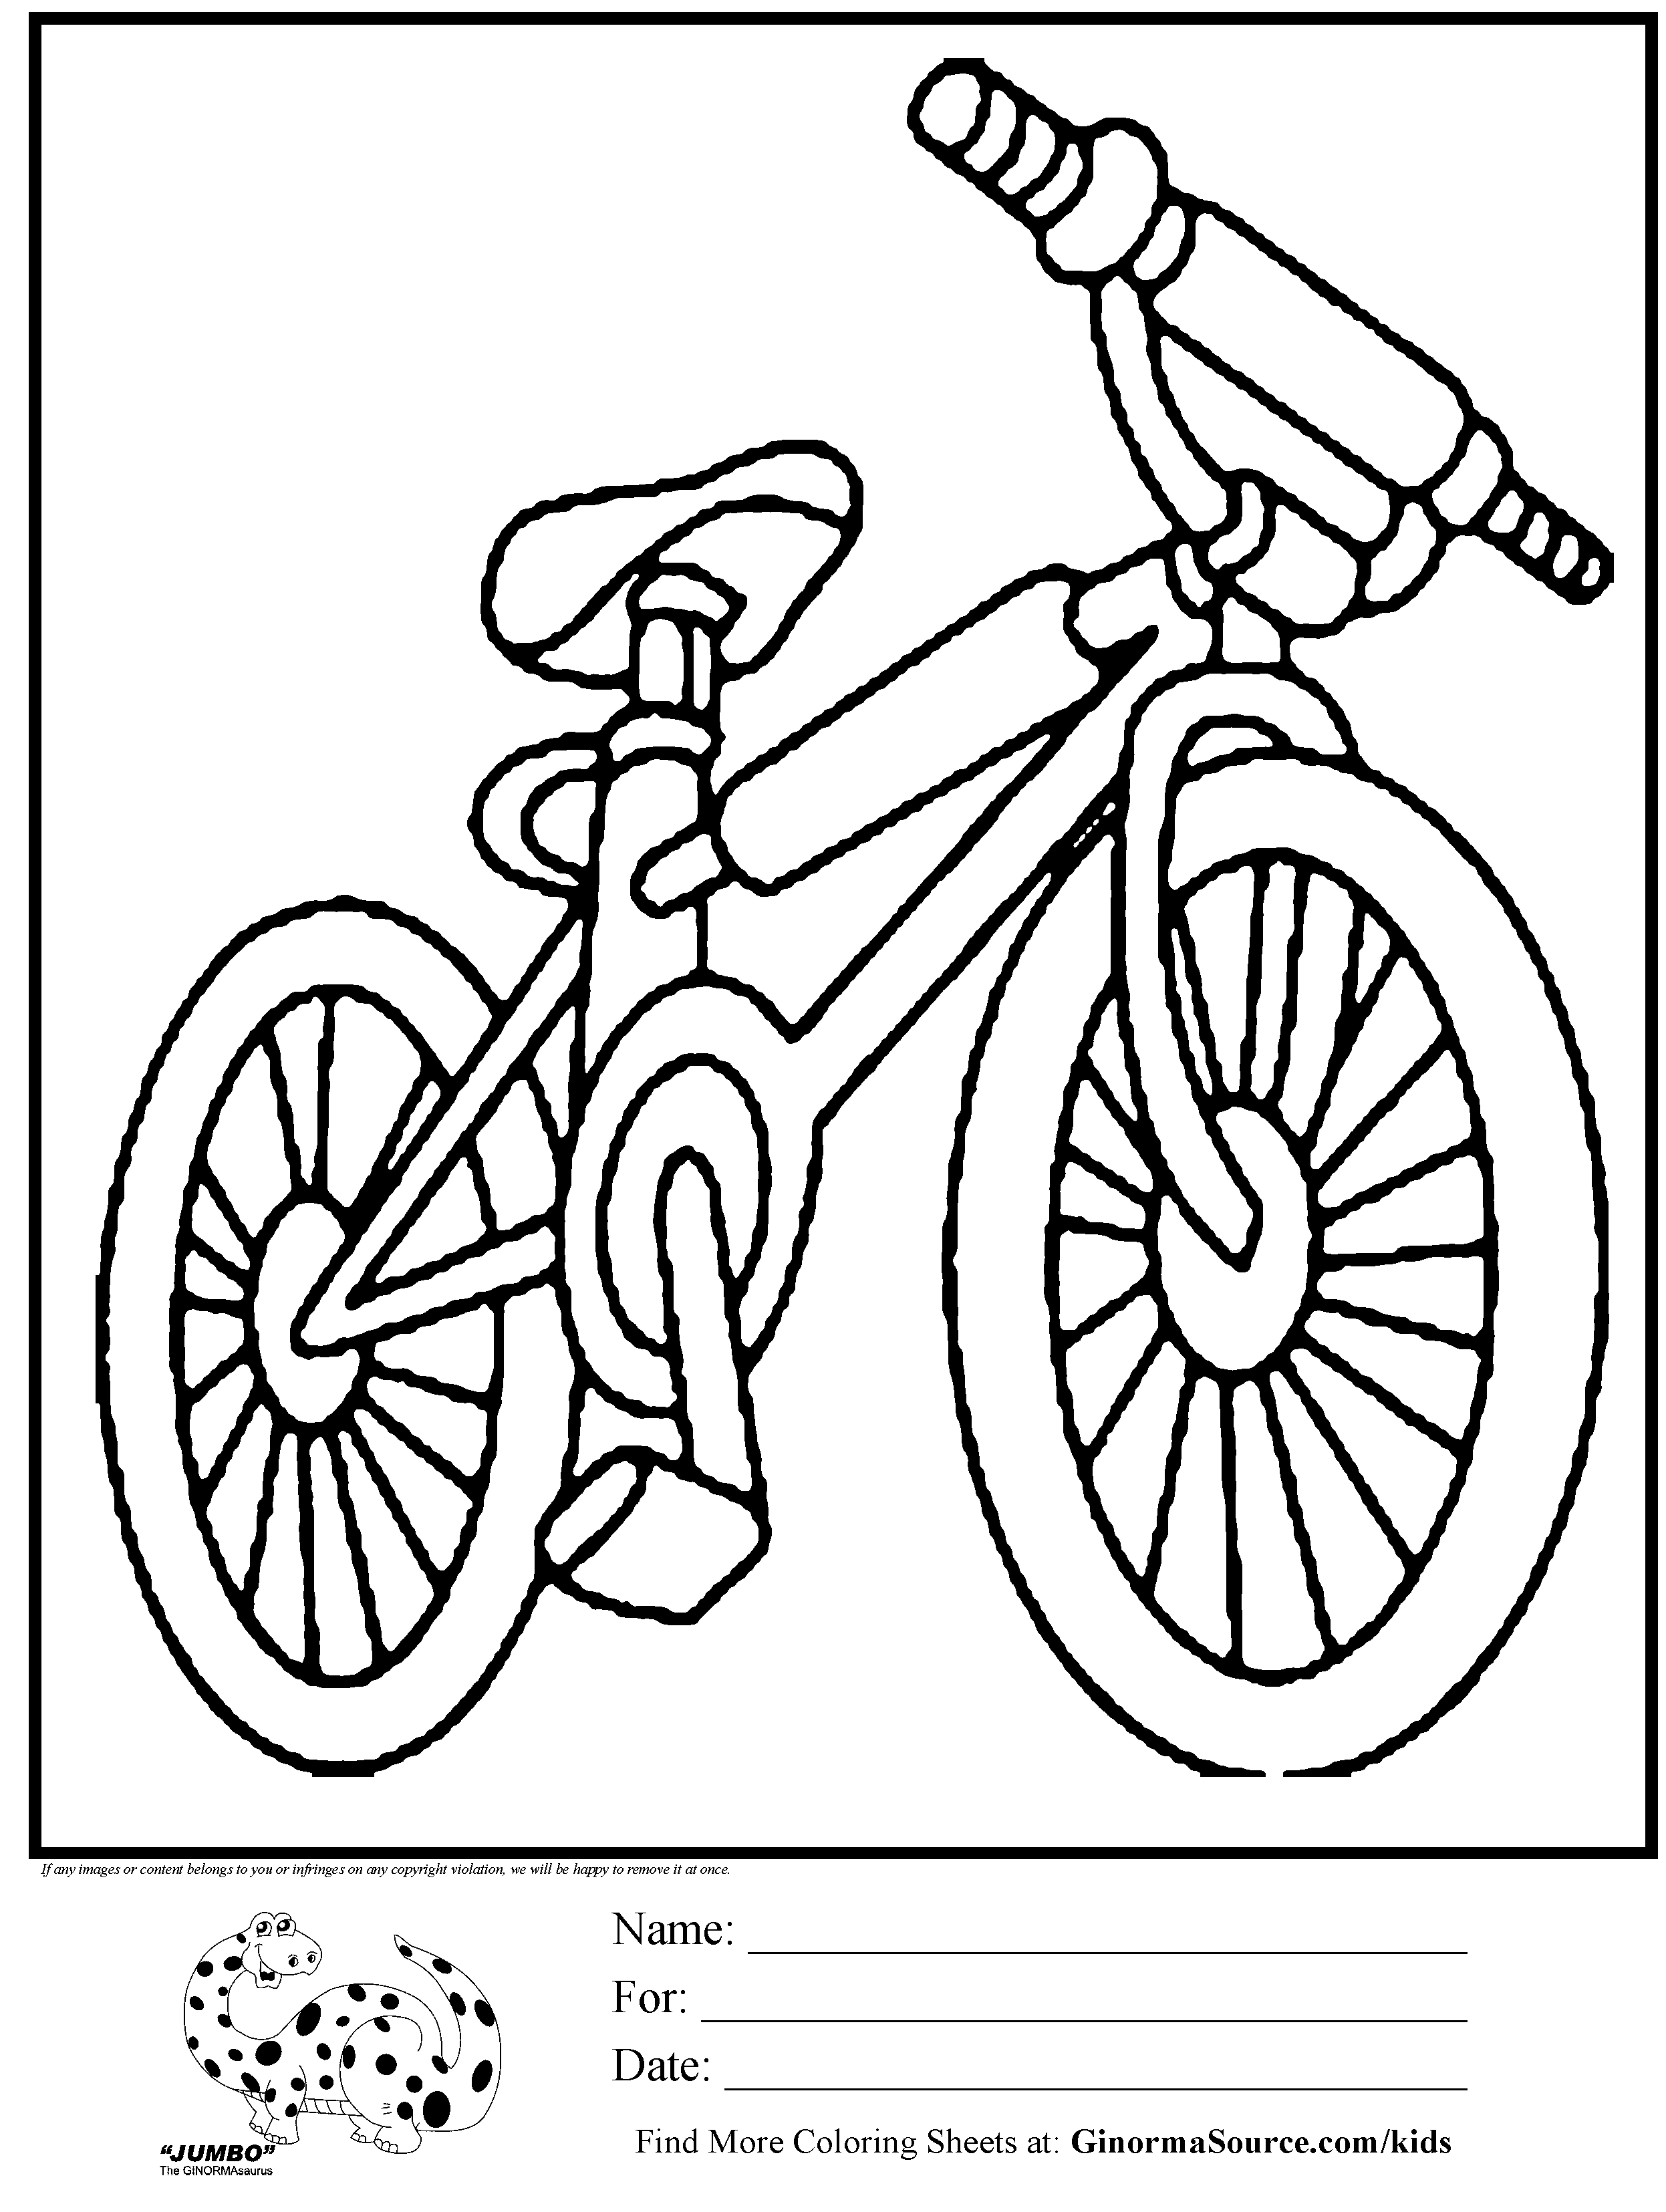 Bicycle coloring pages to download and print for free